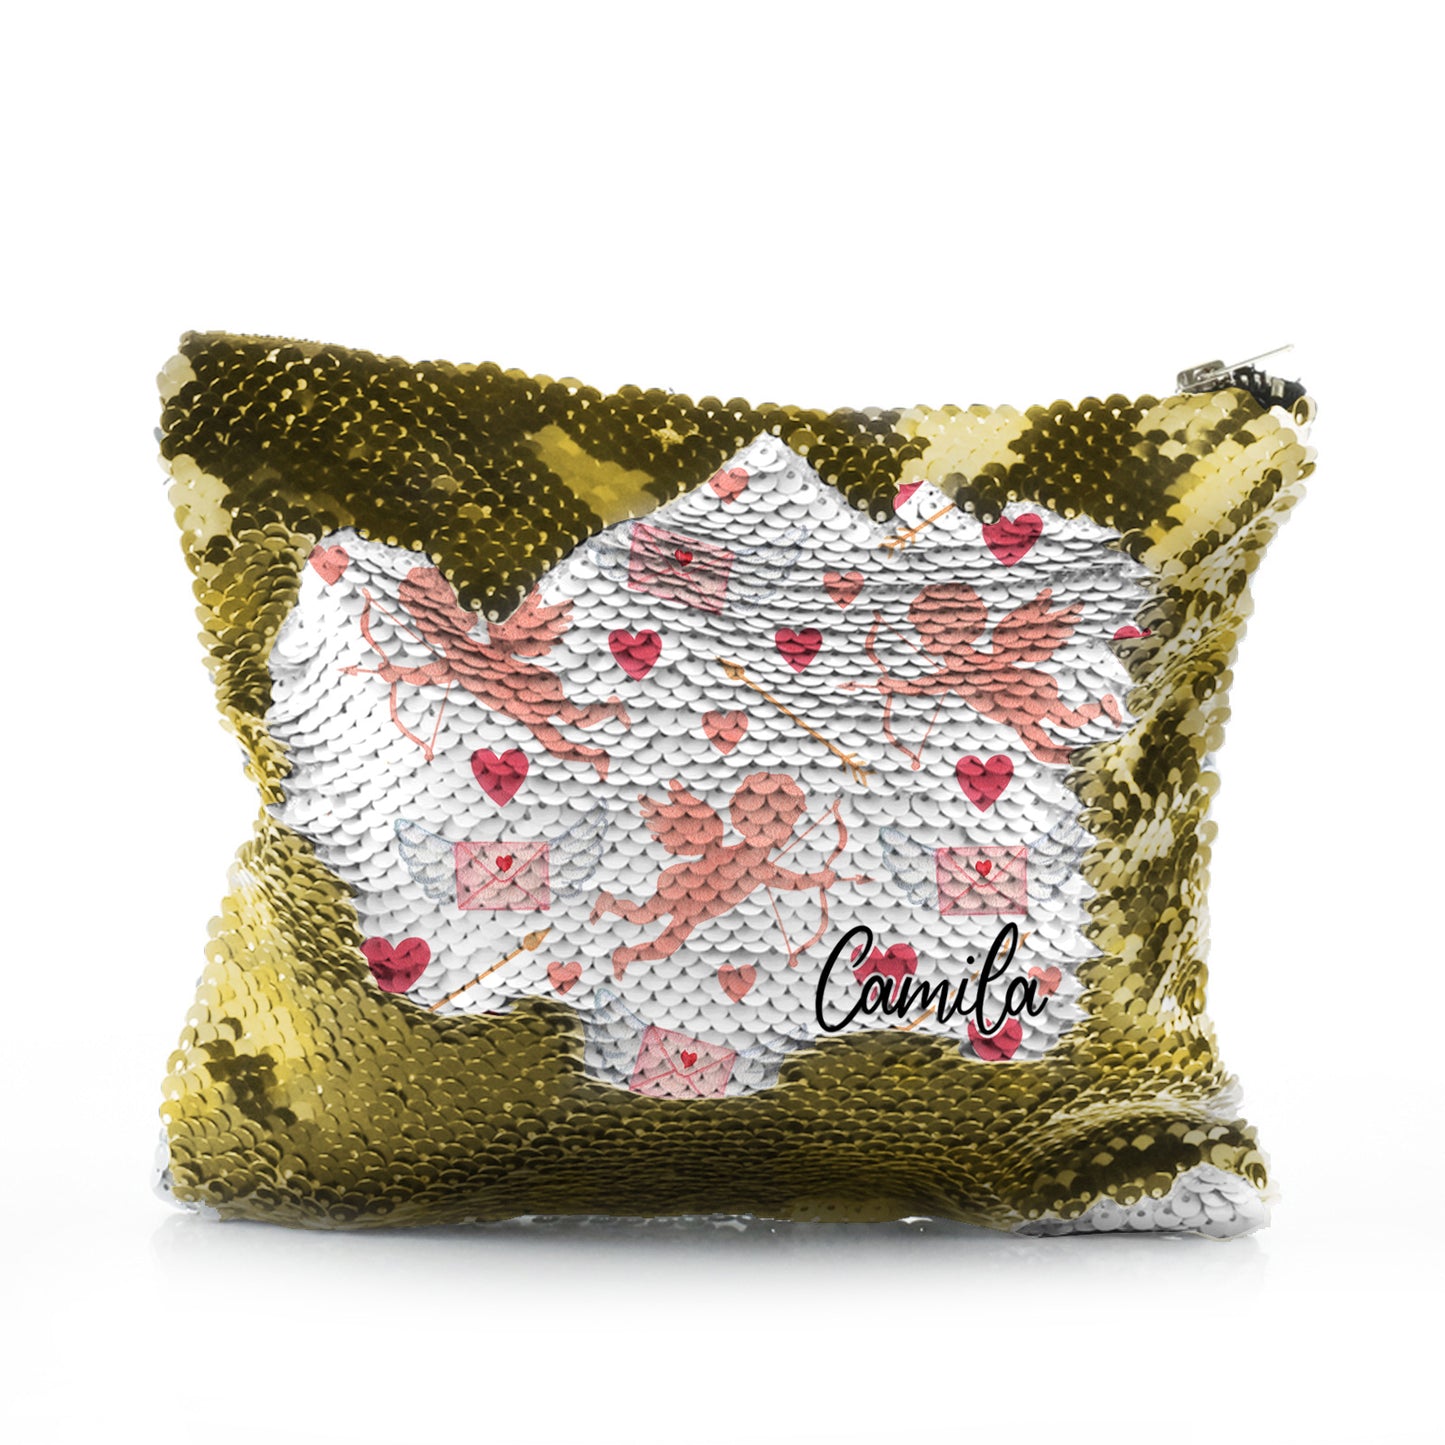 Personalised Sequin Zip Bag with Stylish Text and Cupid Hearts Print